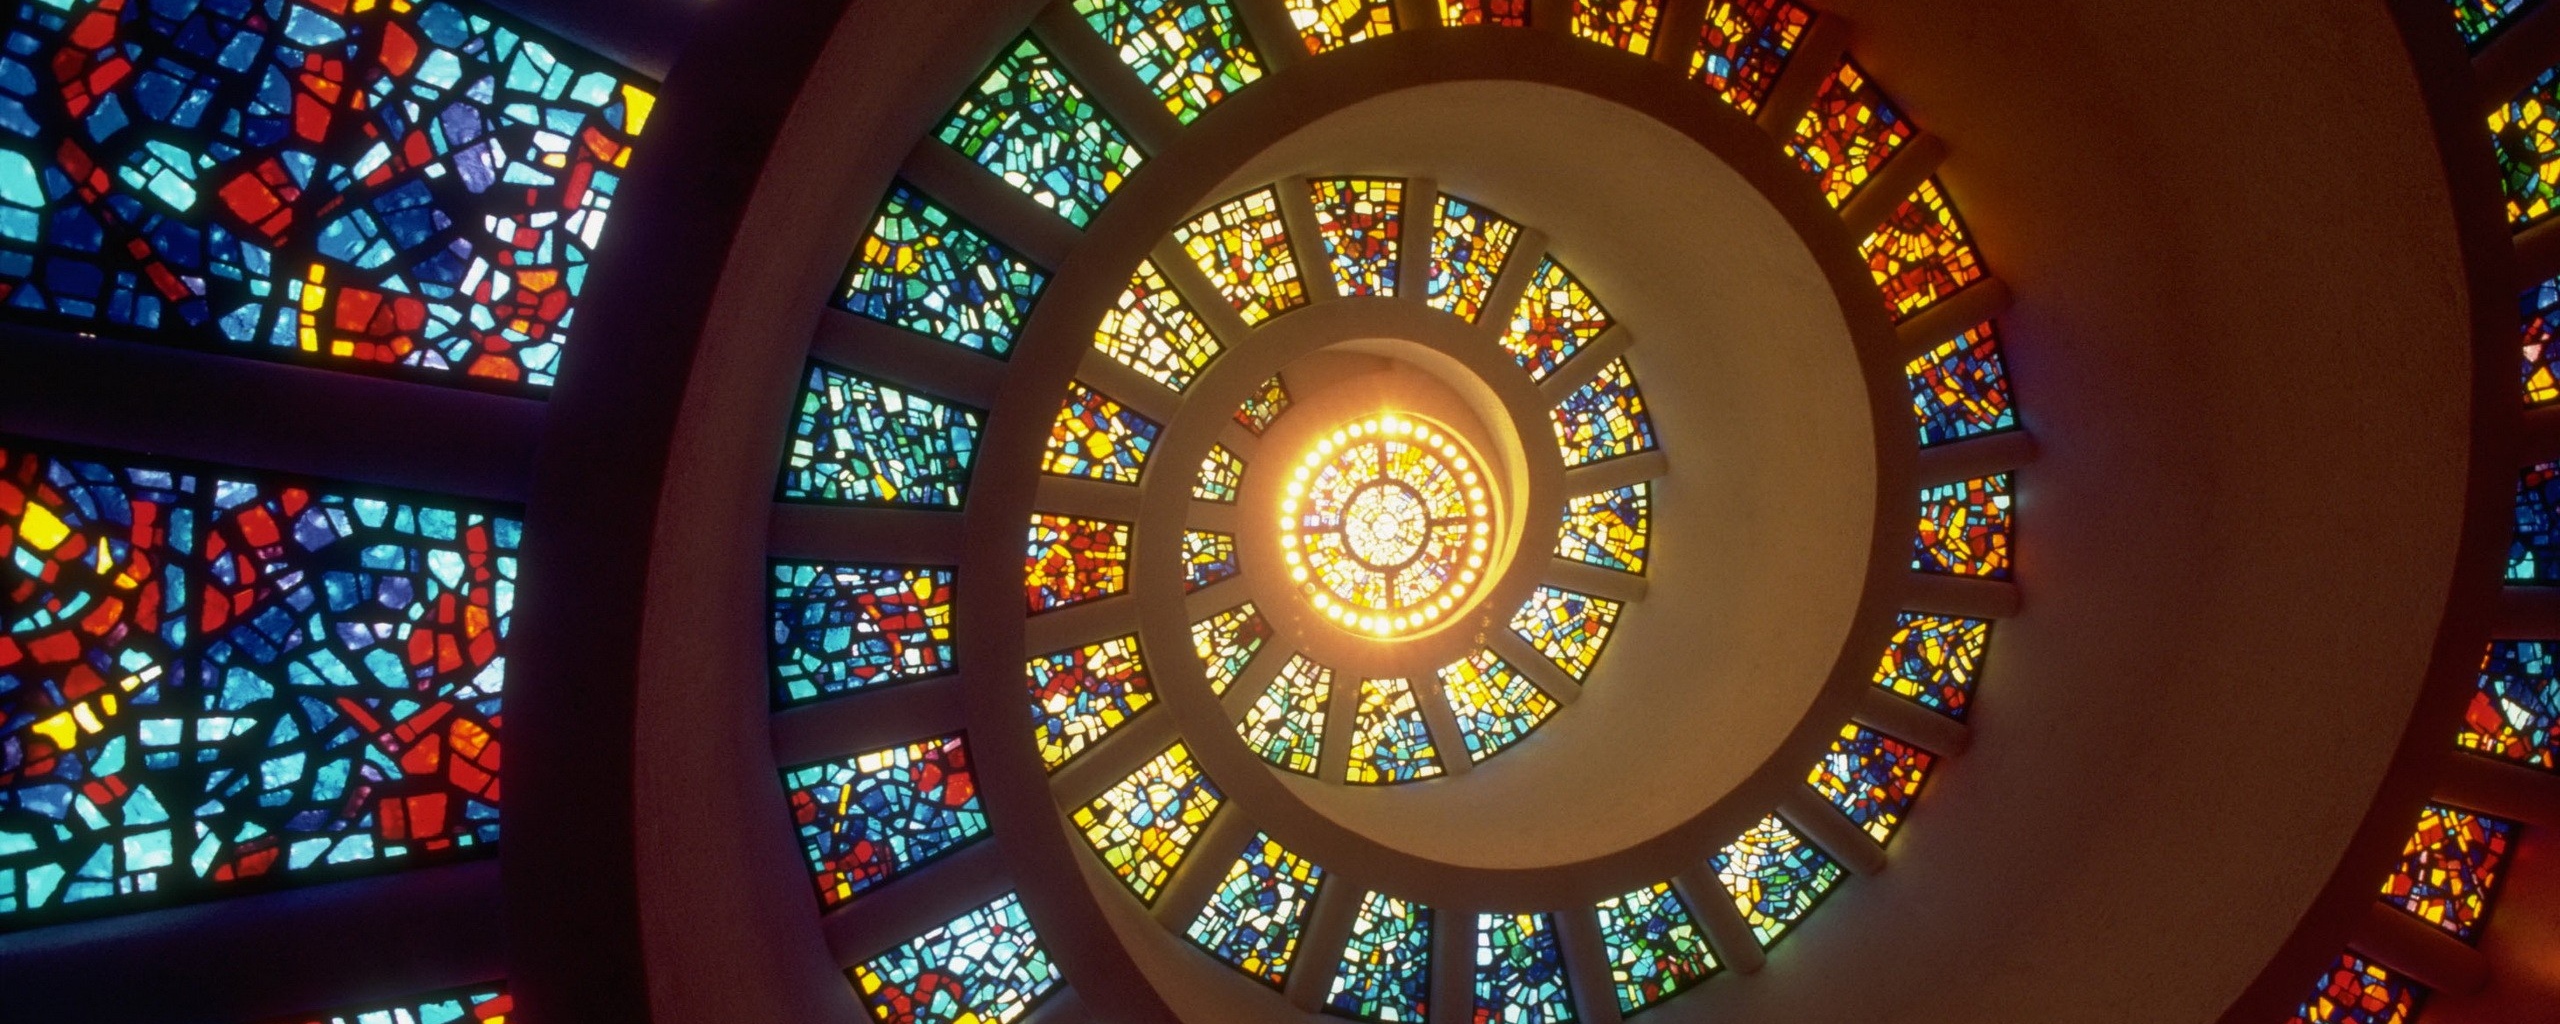 Download Wallpaper 2560x1024 Spiral, Light, Stained glass, Windows